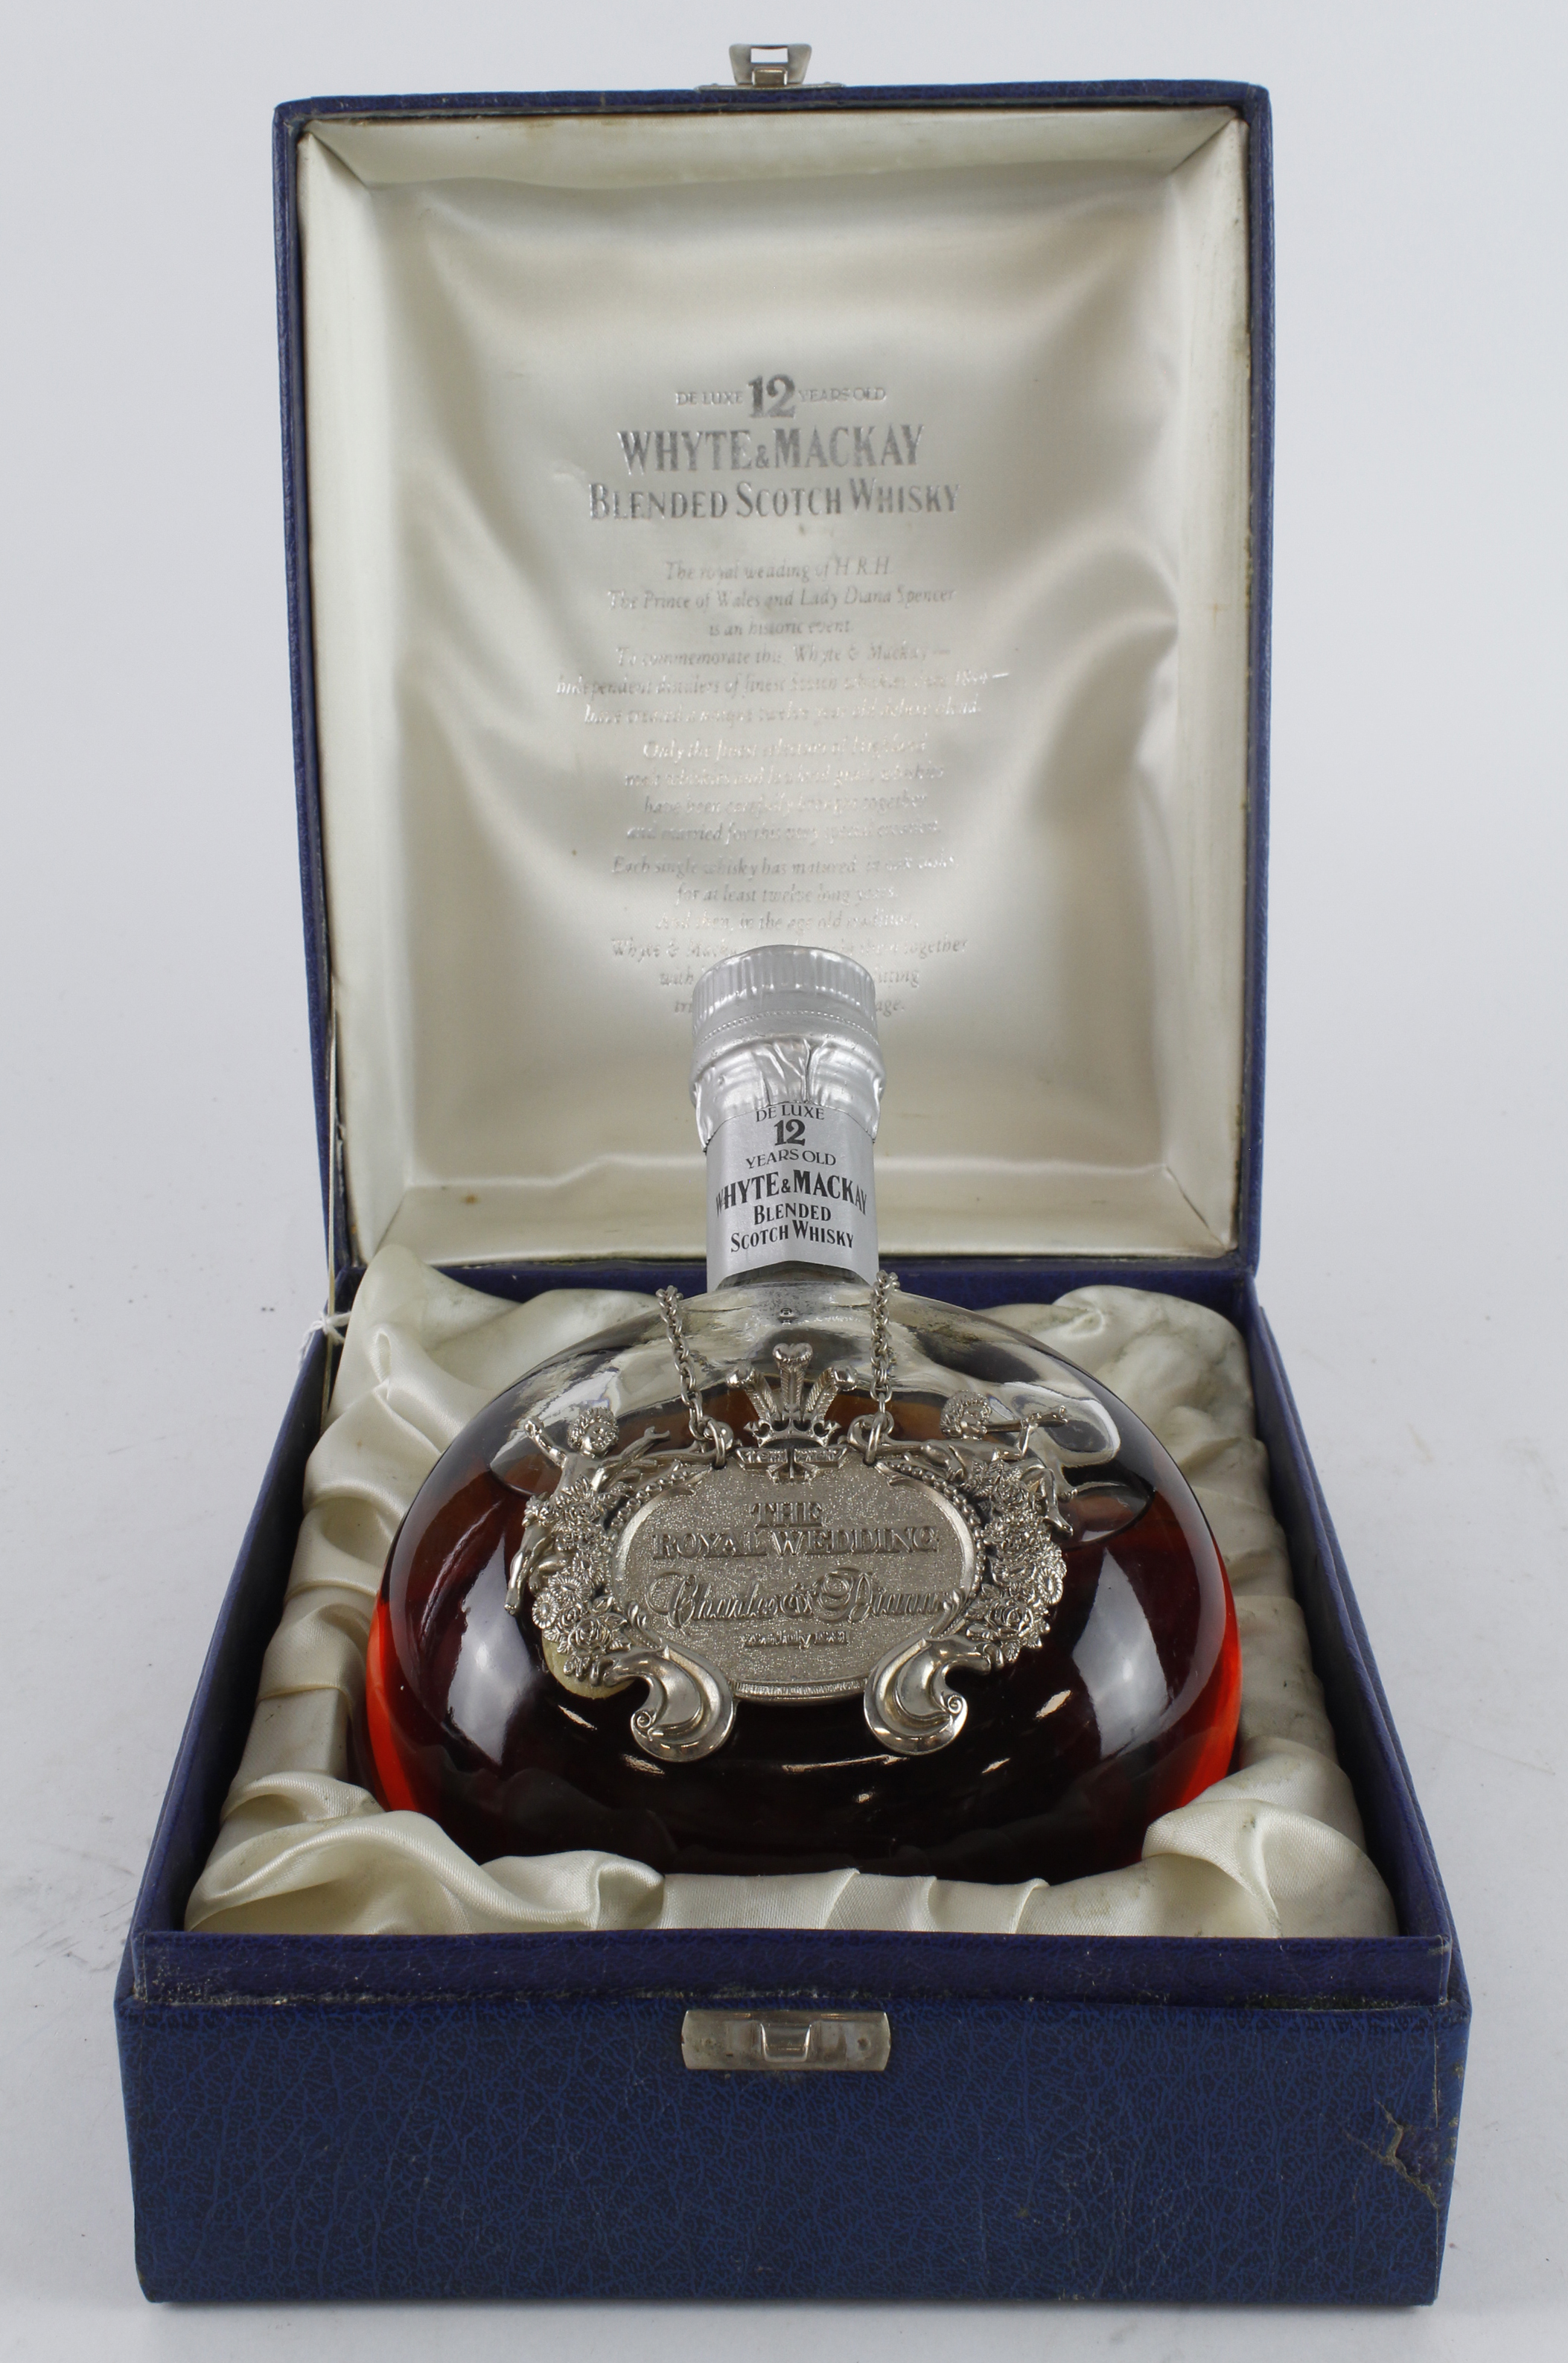 Whyte & MacKay 12 Year Old Blended Scotch Whisky, commemorating the Royal Wedding of the Prince of